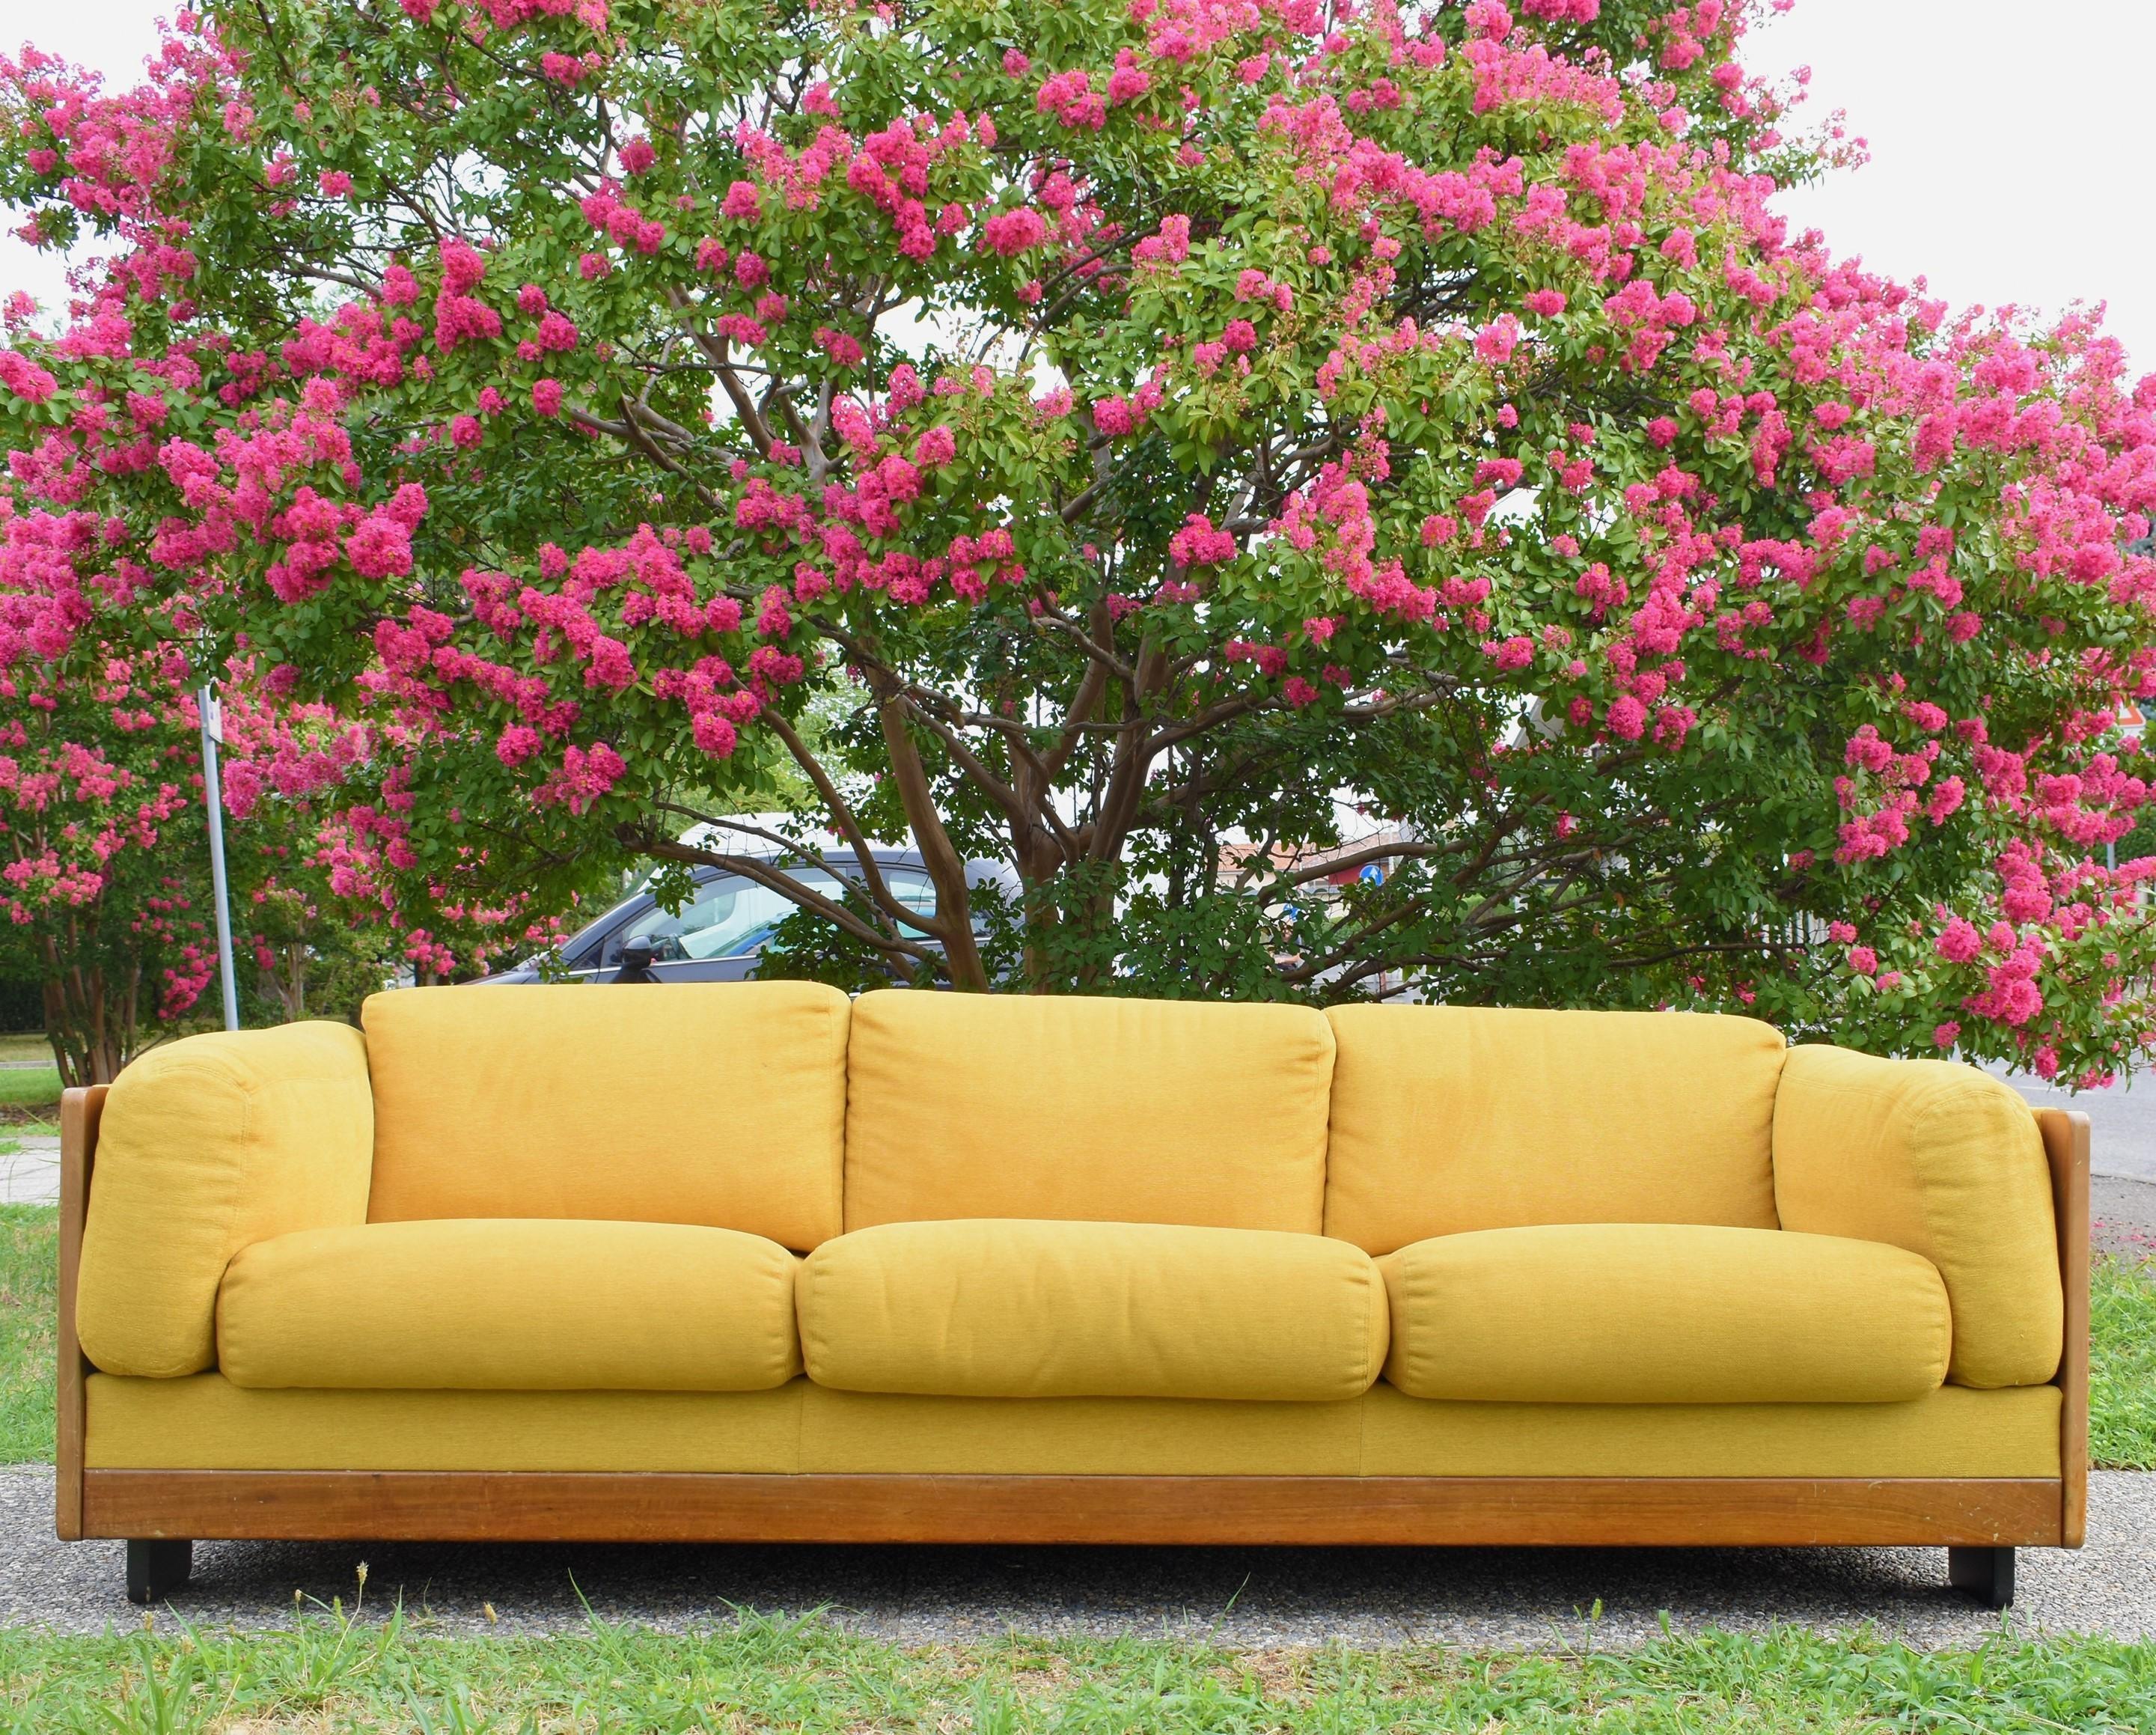 Vintage sofa model 920 from the 1960s, Italian manufacture, design by Afra & Tobia Scarpa for Cassina.

The sofa mod. 920 three-seater, has a yellow-ocher fabric upholstery, with wooden profiles.